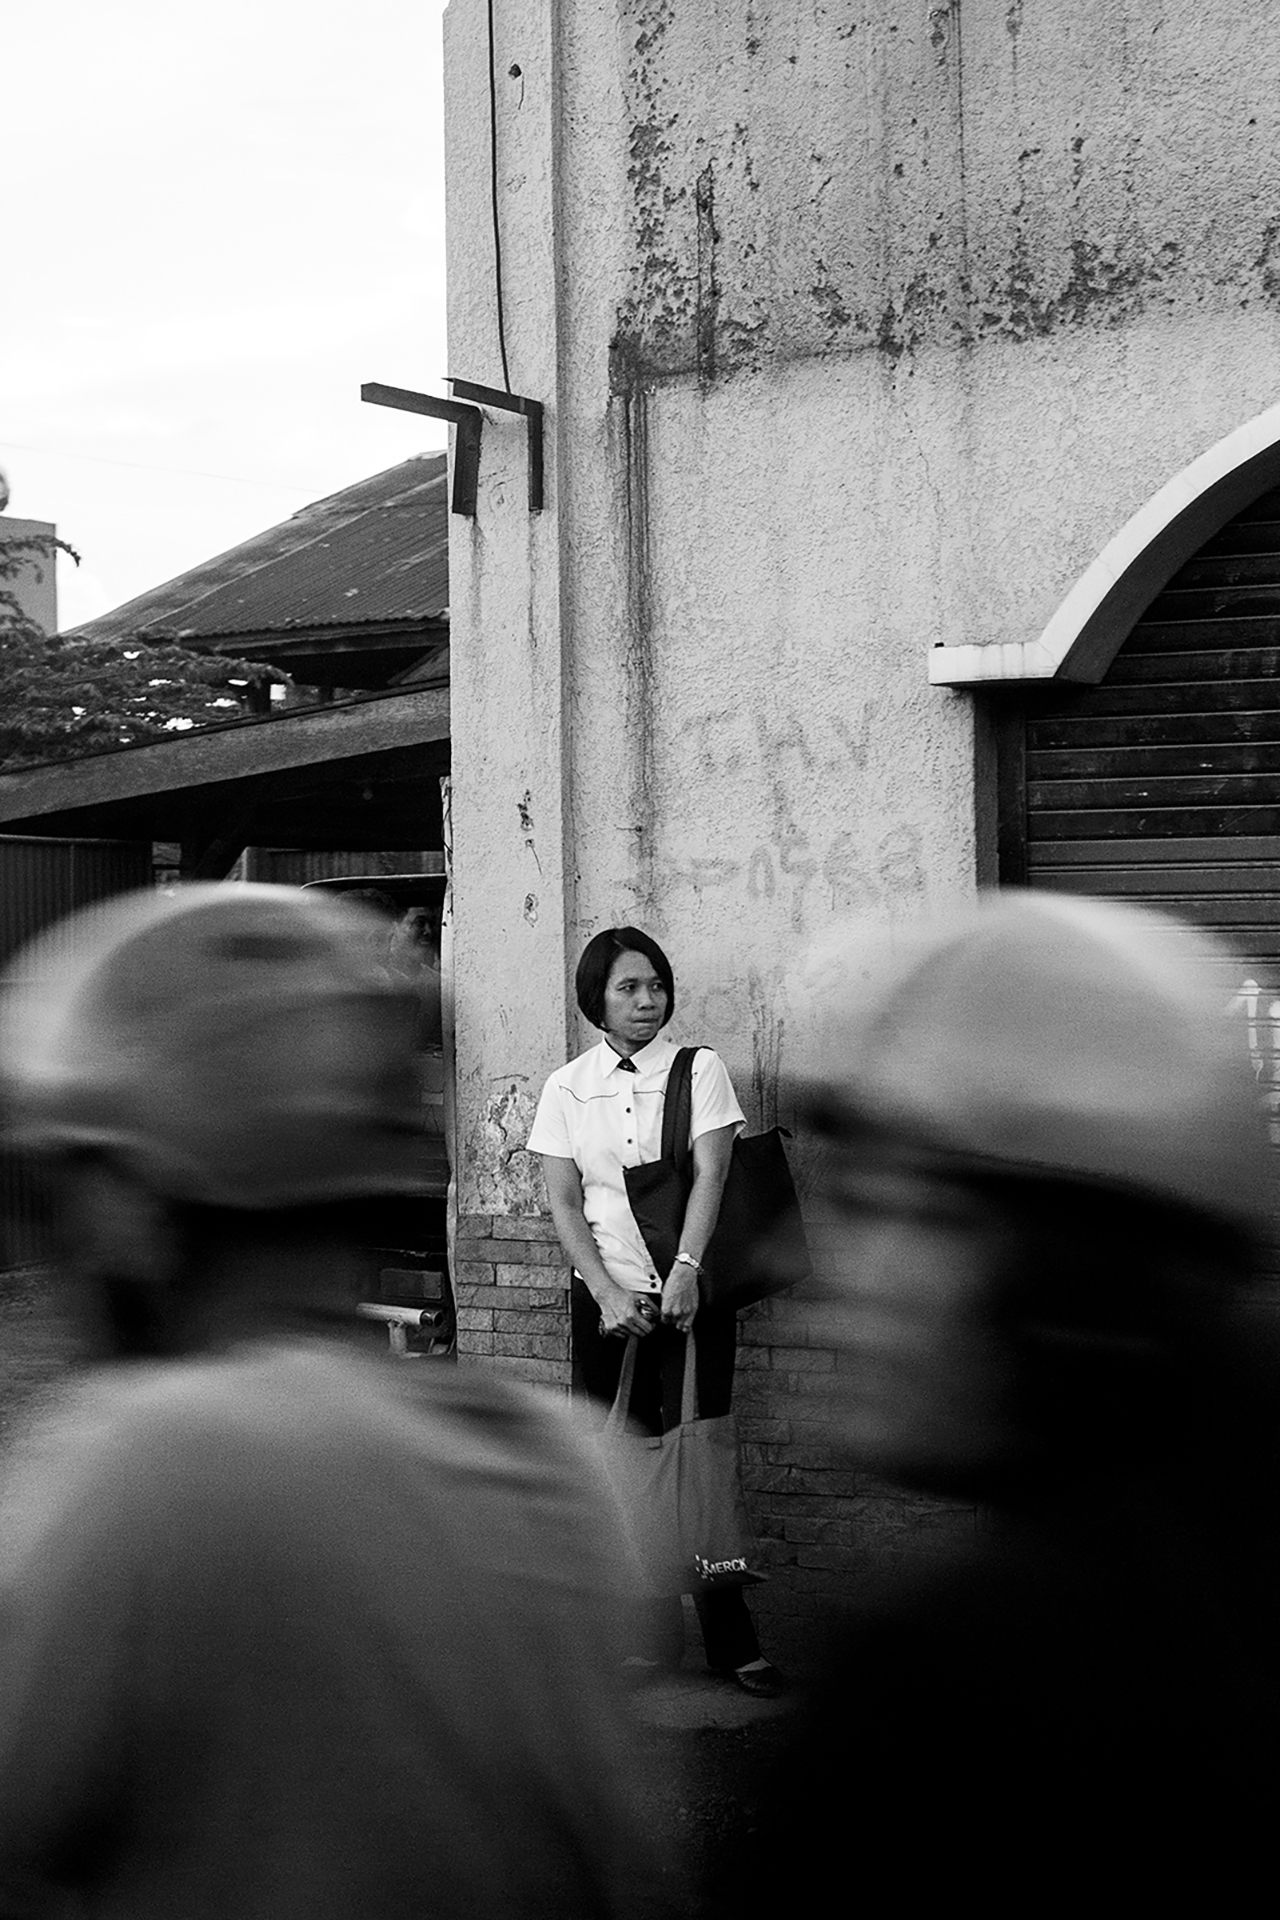 Bus Stop - A woman waits at a bus stop as new motorcycle taxi passes by in Cebu, Philippines.